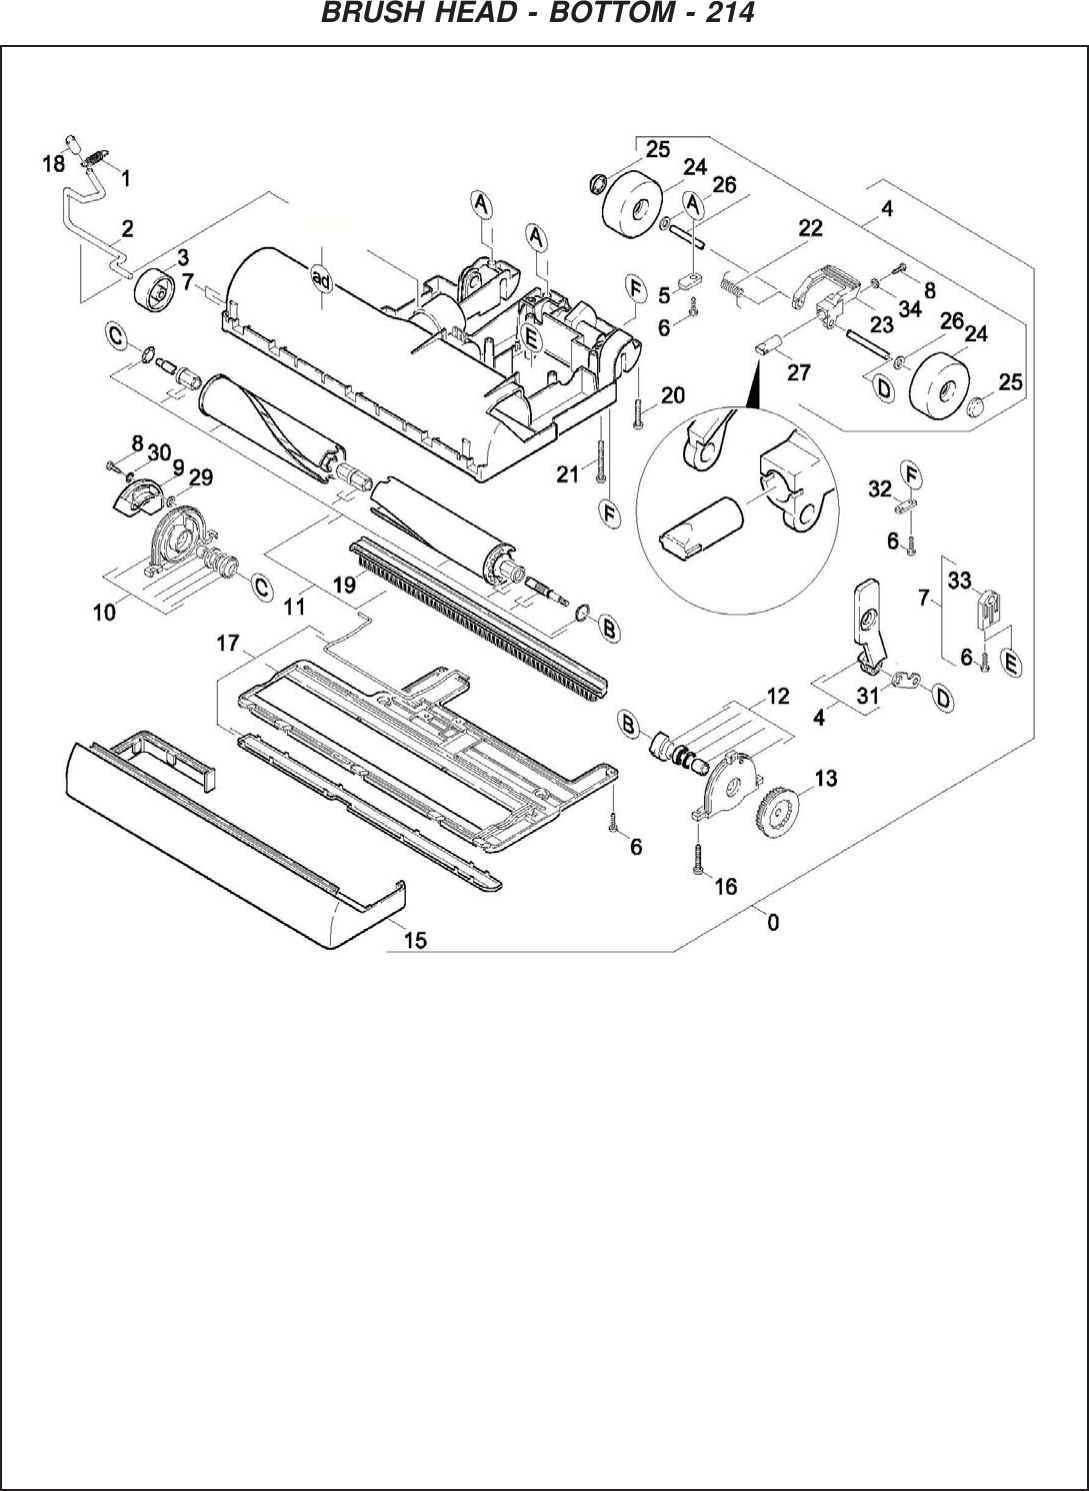 Page 9 of 12 - 9097272 Pacer Dual Motor Illustrated Parts Book.pmd  Nss-pacer-214-ue-218-ue-upright-vacuum-parts-manual